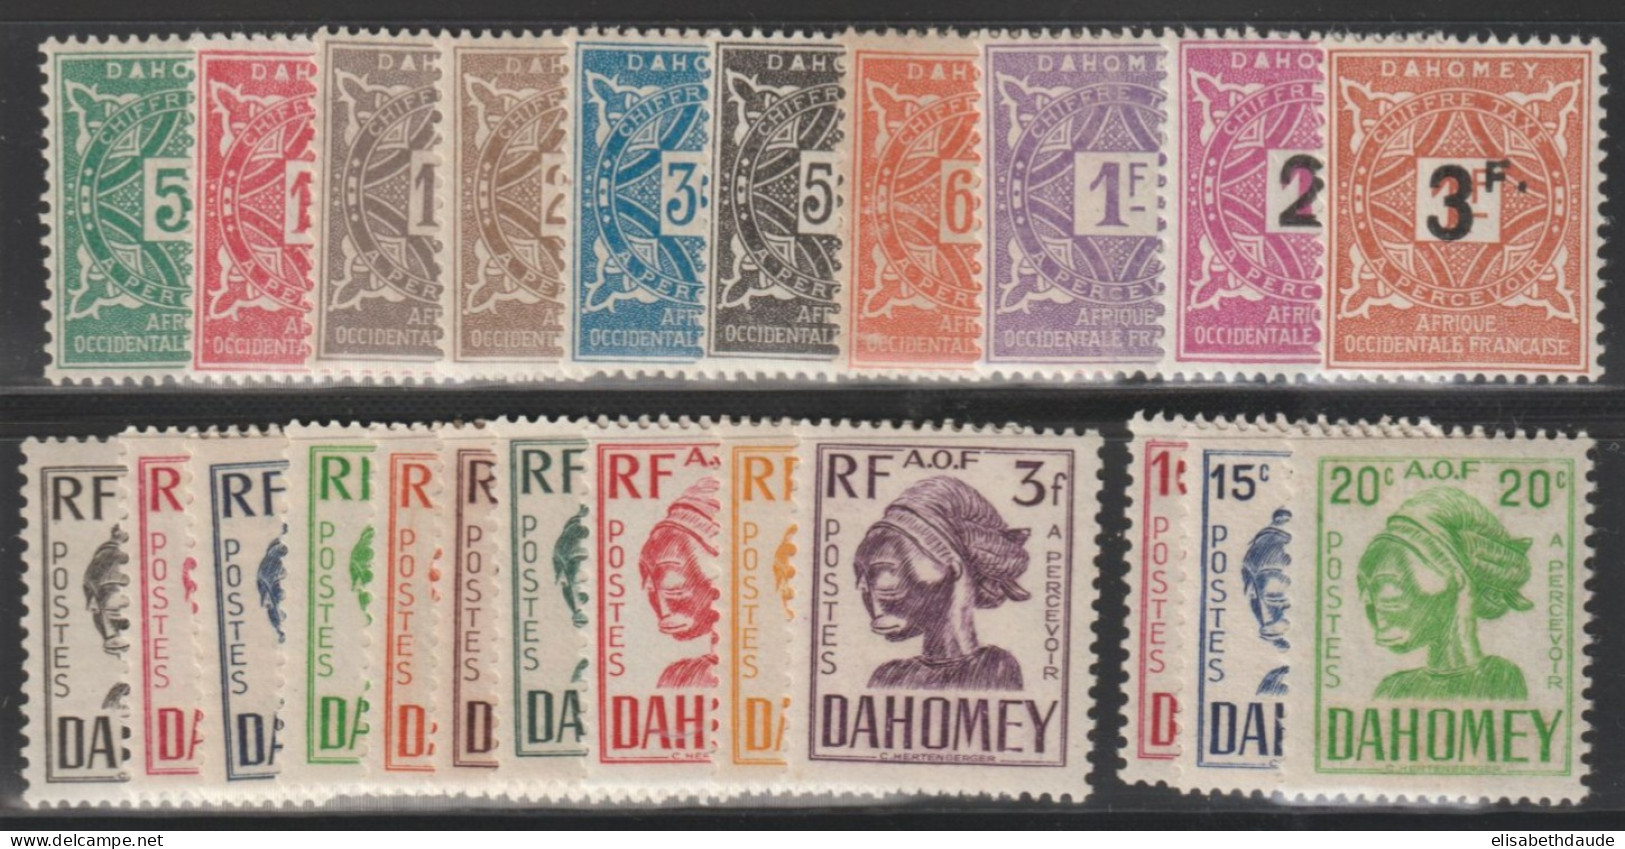 DAHOMEY - 1914/1943 - TAXE - SERIES COMPLETES ! YVERT N°9/31 * MH CHARNIERE CORRECTE ! - COTE = 40 EUR. - - Unused Stamps